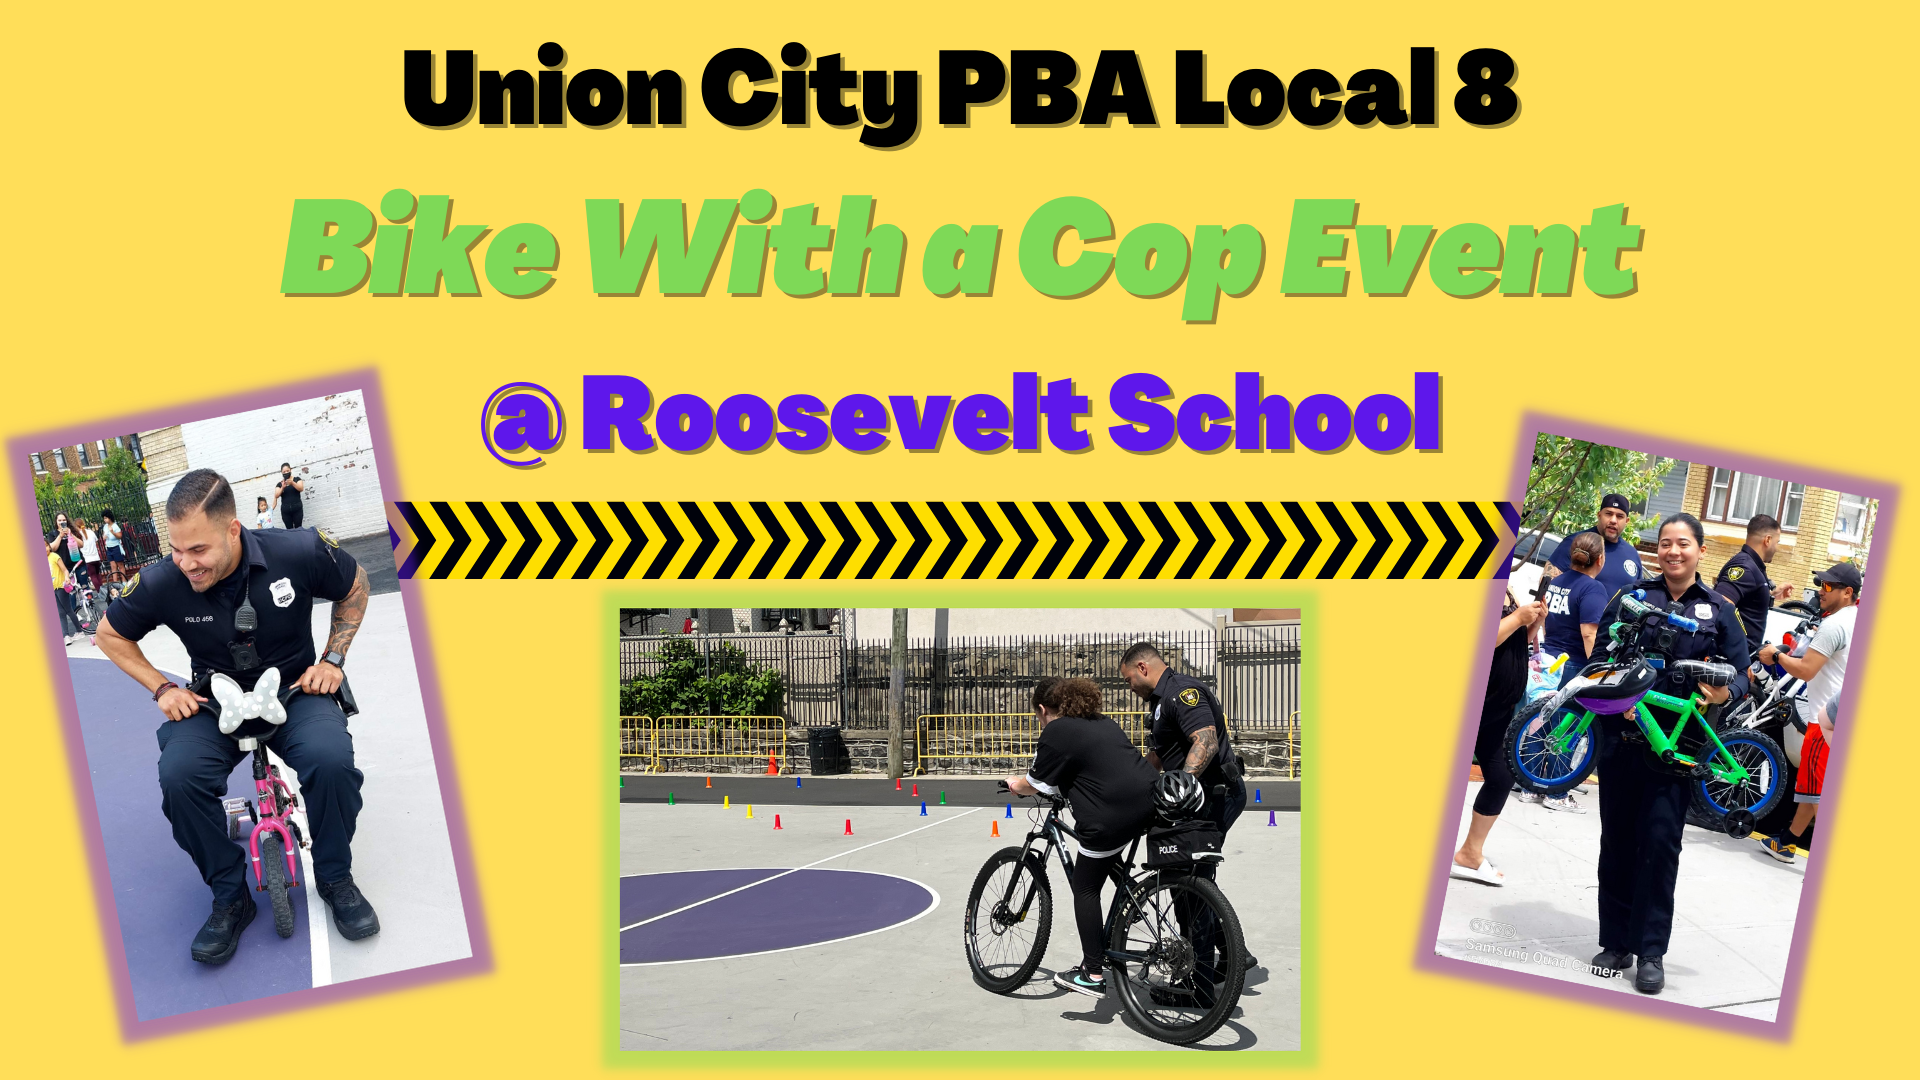 Thank You To The Union City PBA Local 8 For "Bike With A Cop" #1